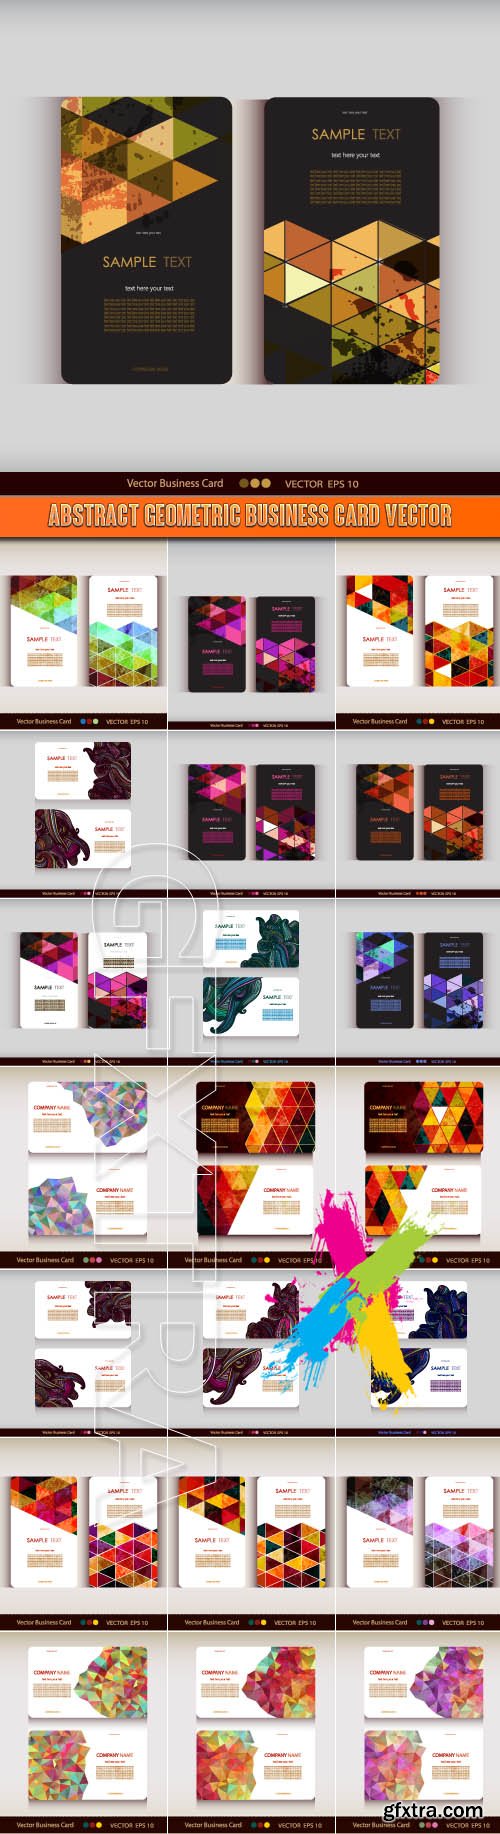 Abstract geometric business card vector